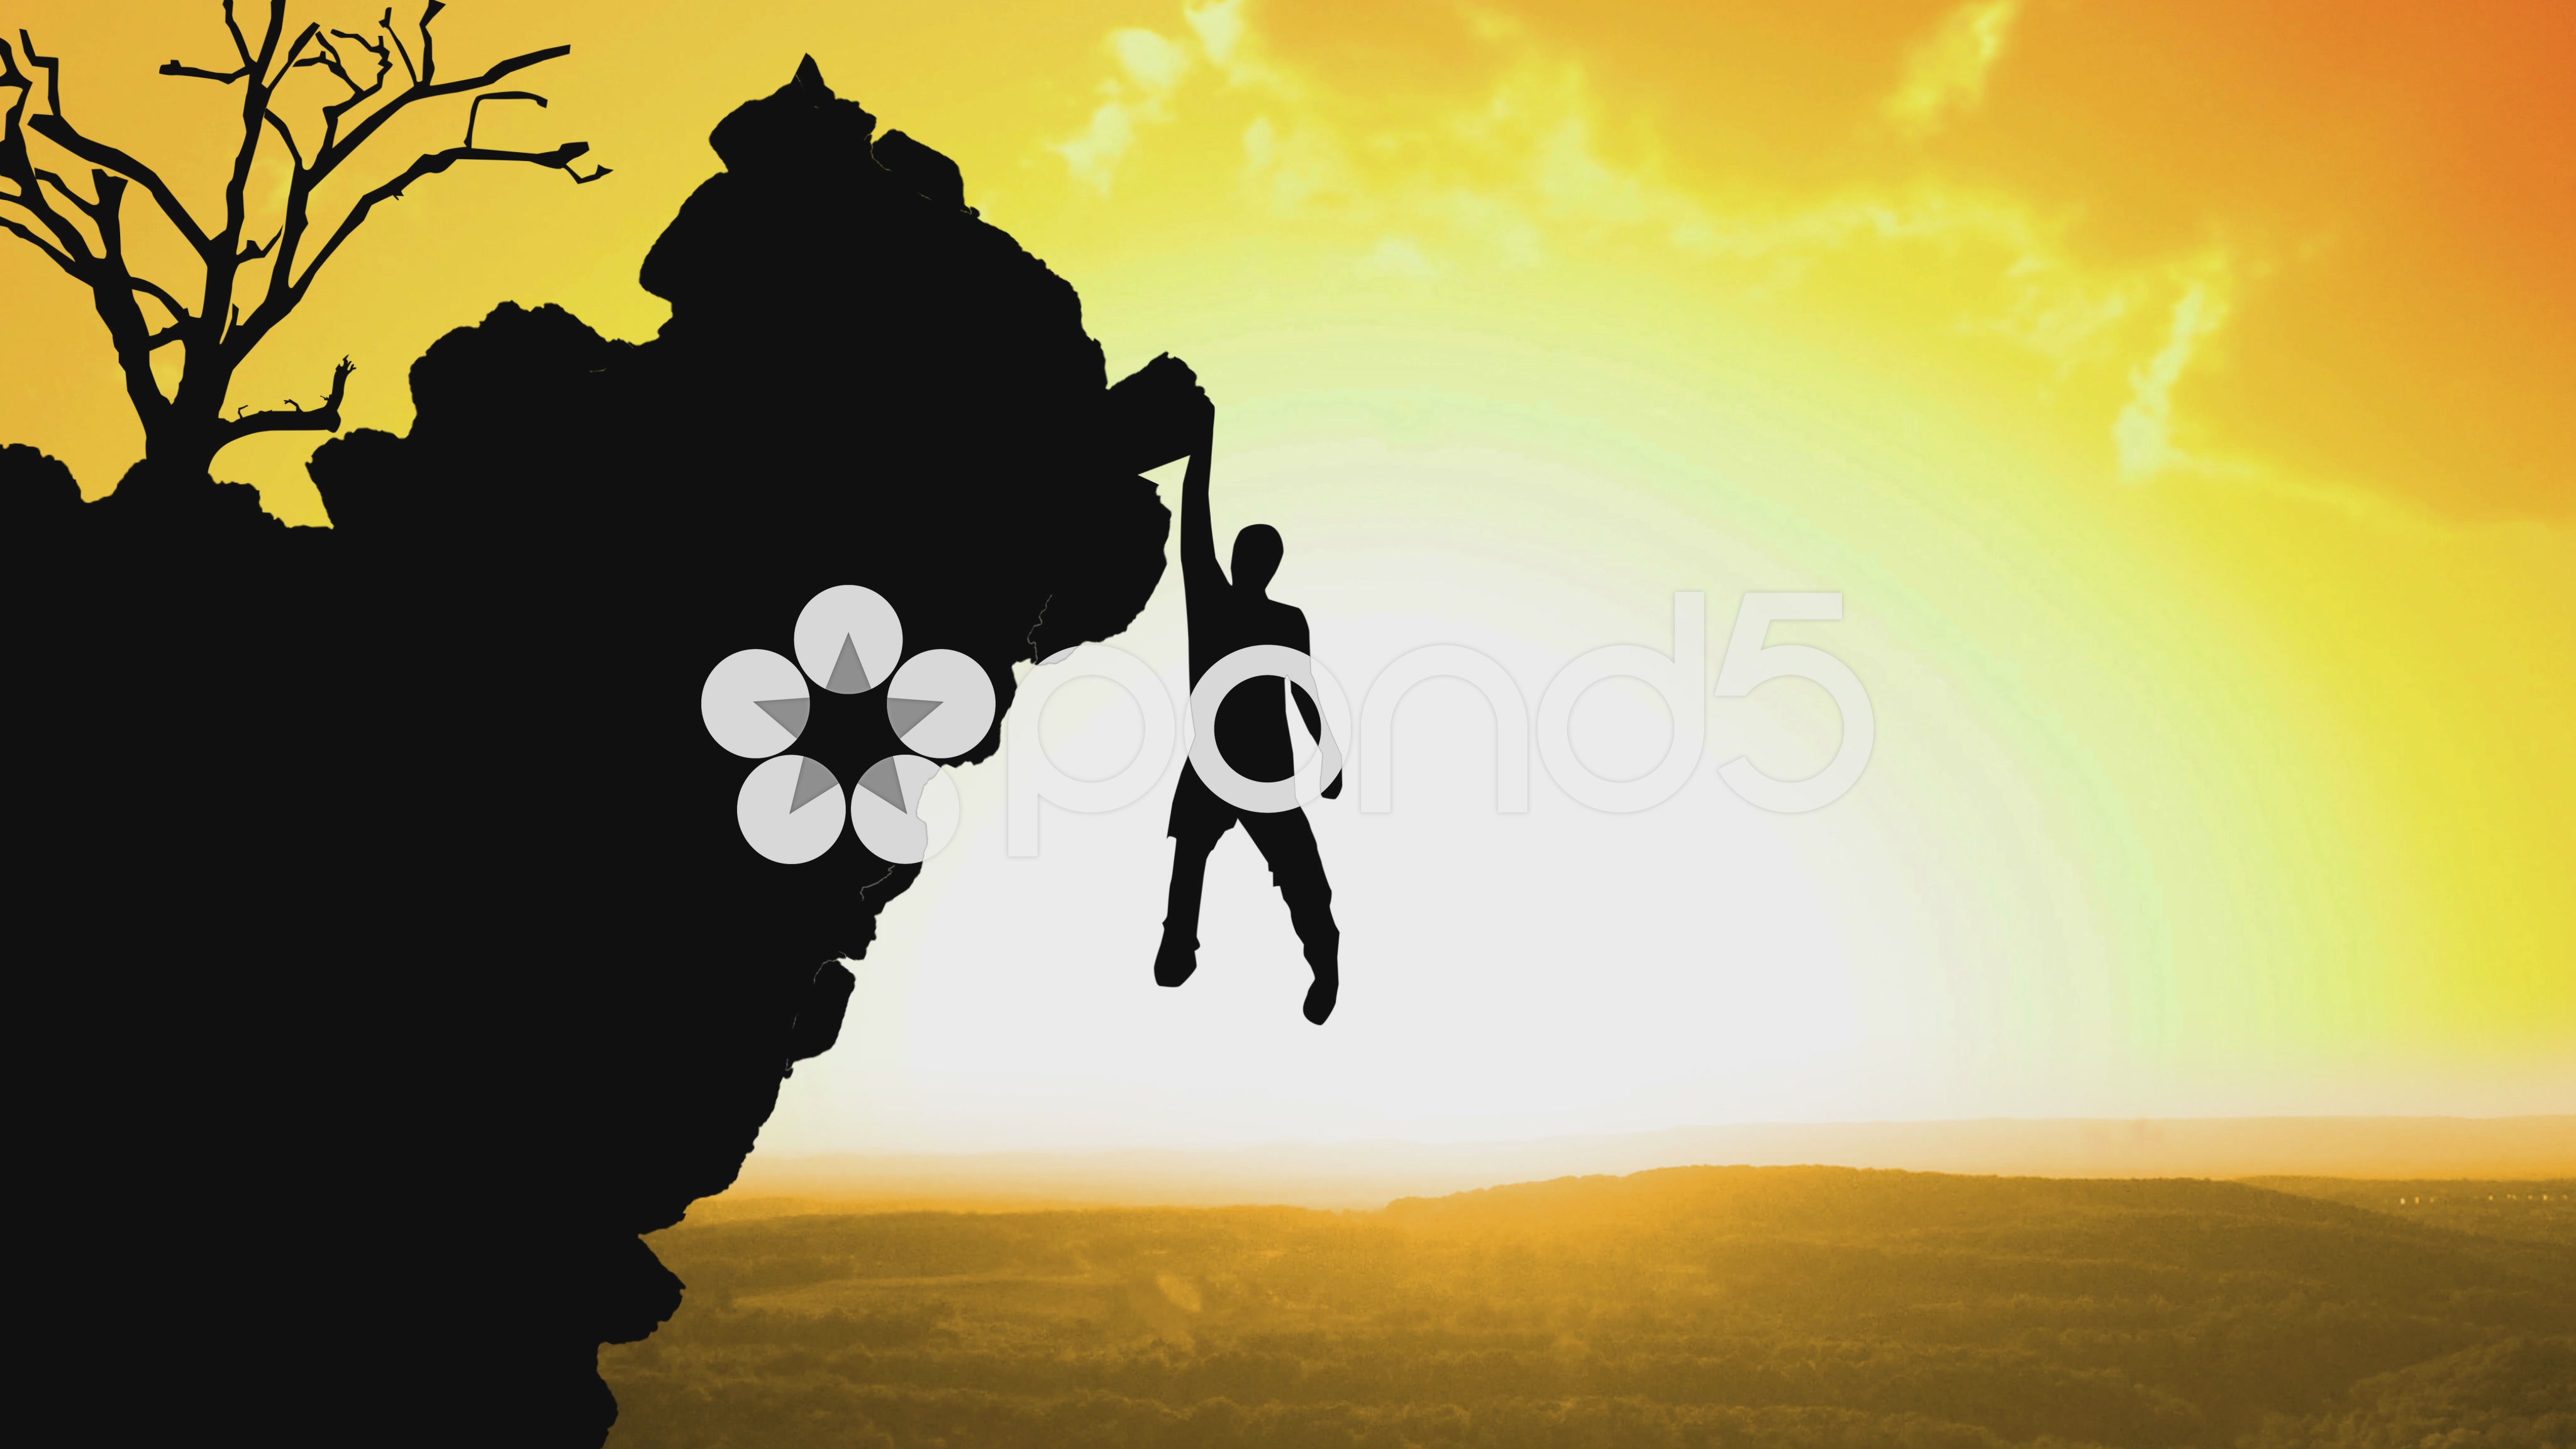 3688 Rock Climber Hanging off Cliff Silhouette at Sunset Animation ...